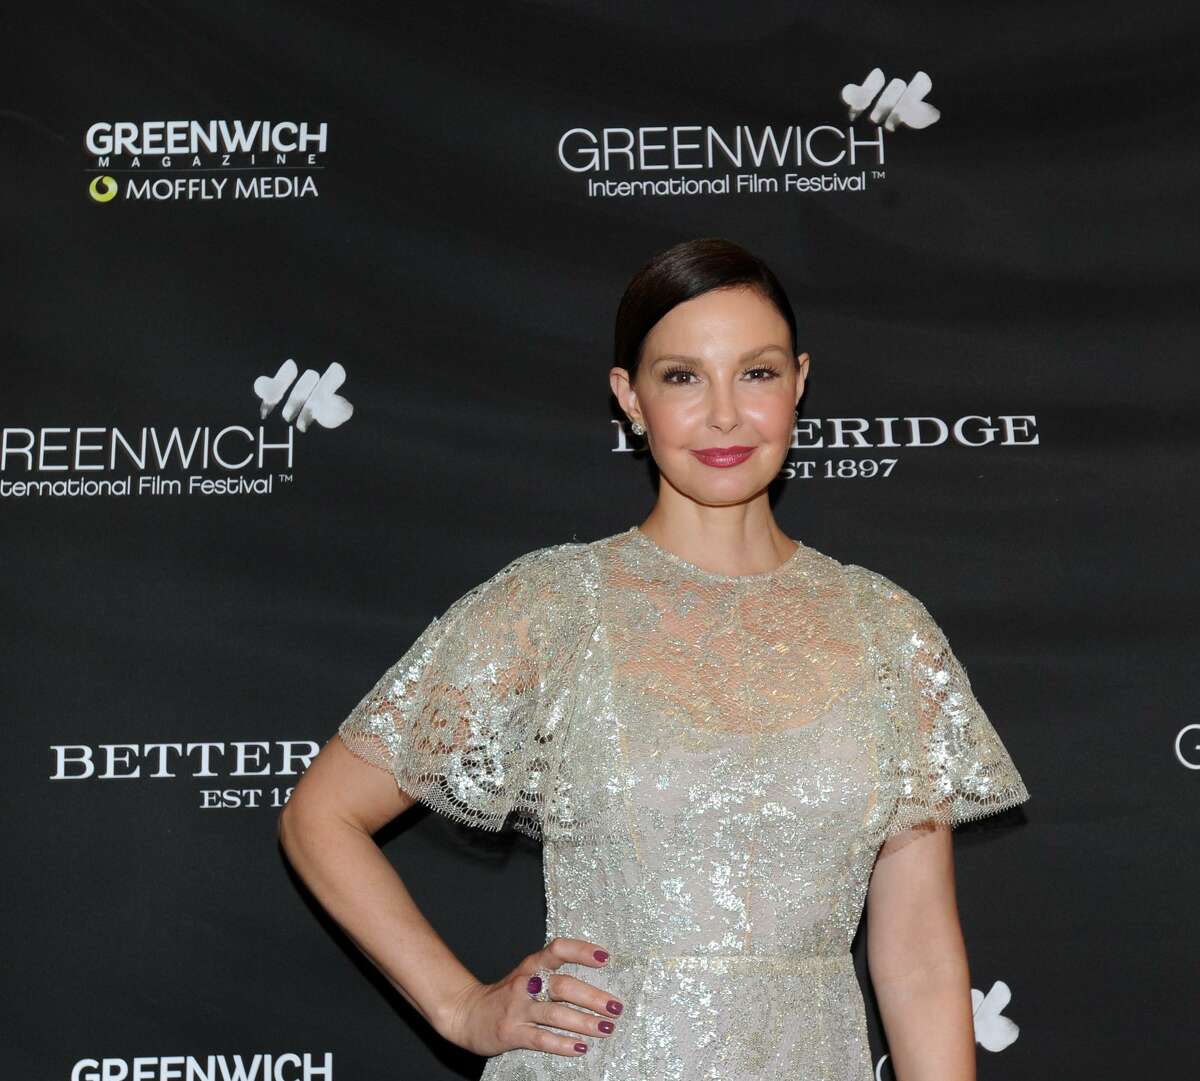 Ashley Judd arrives at the Changemaker Gala at Betteridge Jewelers in Greenwich as part of the Greenwich International Film Festival. The gala honored the actress and activist. The film festival continues Saturday and Sunday in venues around town.